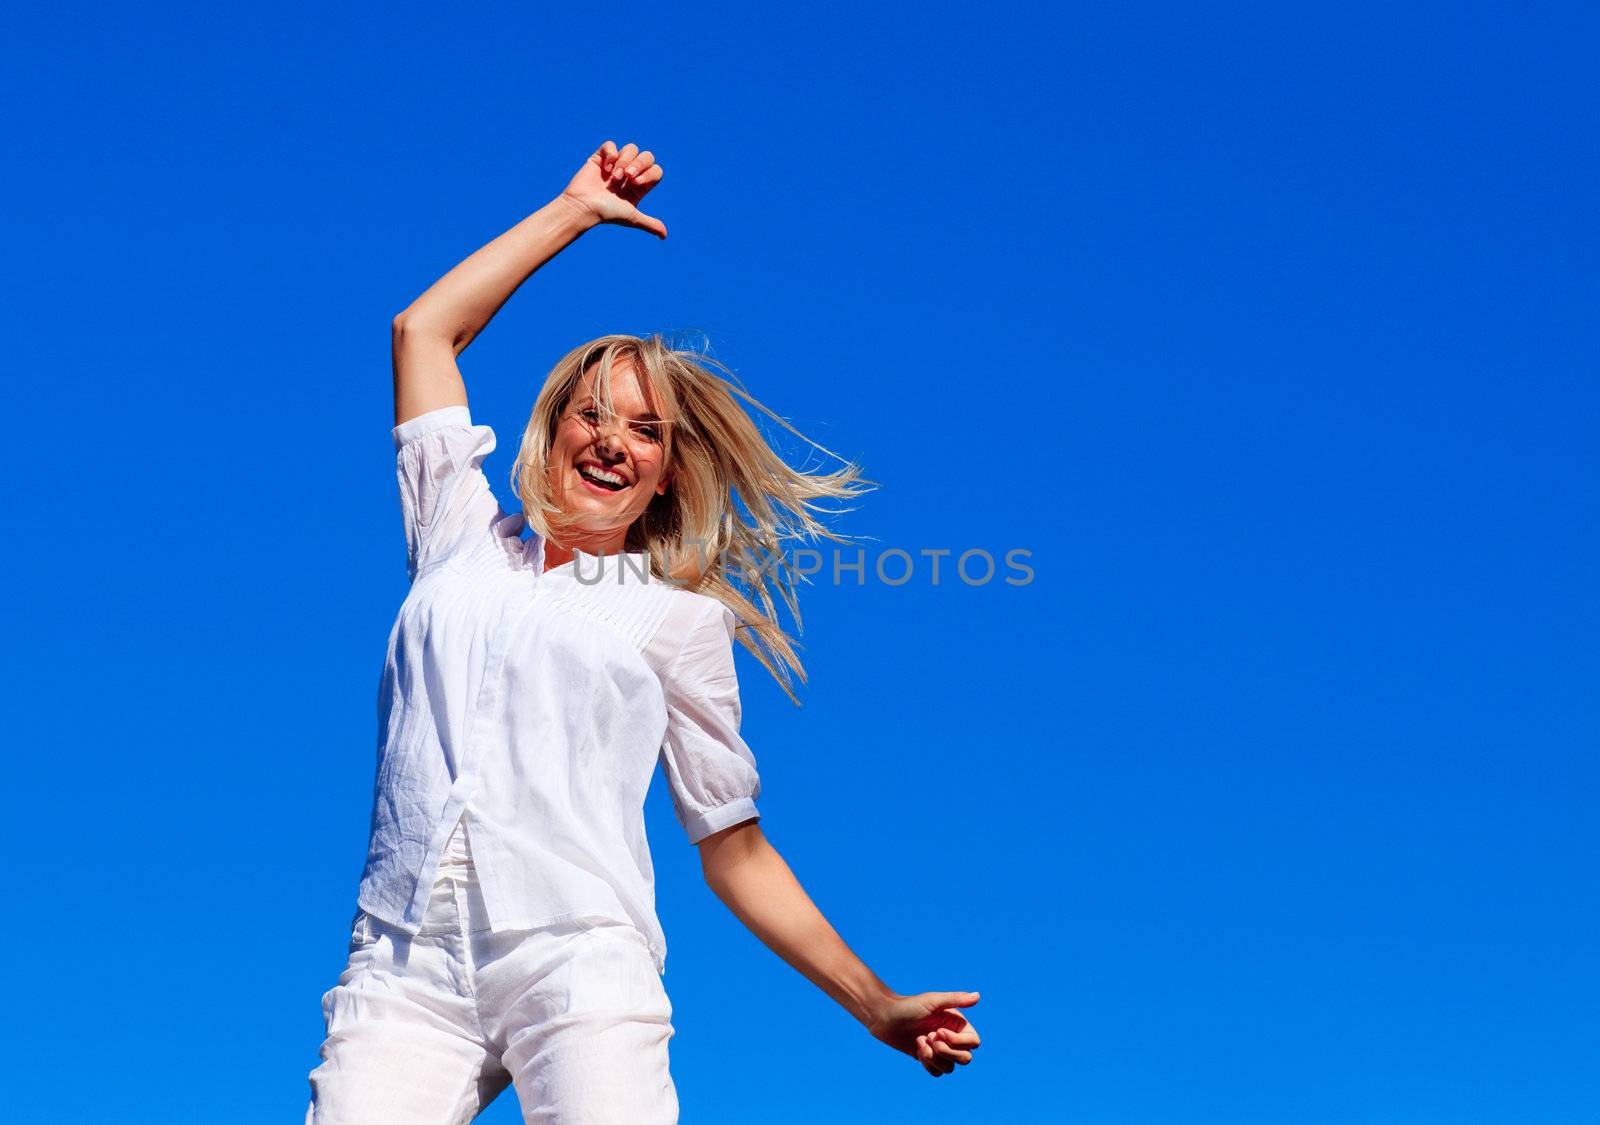 Smiling woman jumping outdoors against blue sky